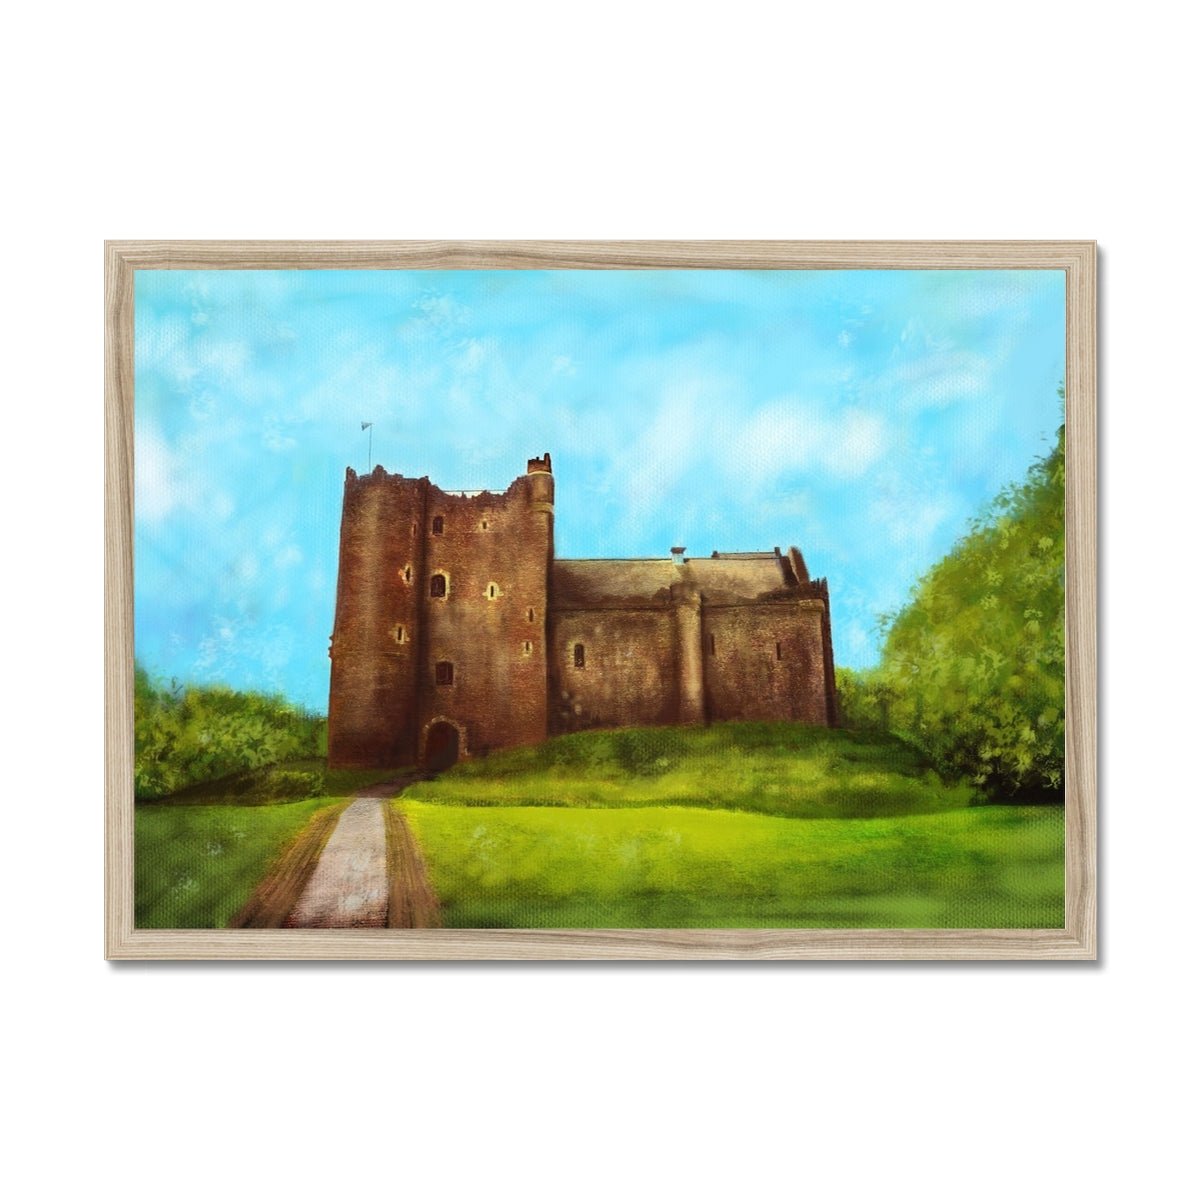 Doune Castle Painting | Framed Prints From Scotland-Framed Prints-Historic & Iconic Scotland Art Gallery-A2 Landscape-Natural Frame-Paintings, Prints, Homeware, Art Gifts From Scotland By Scottish Artist Kevin Hunter